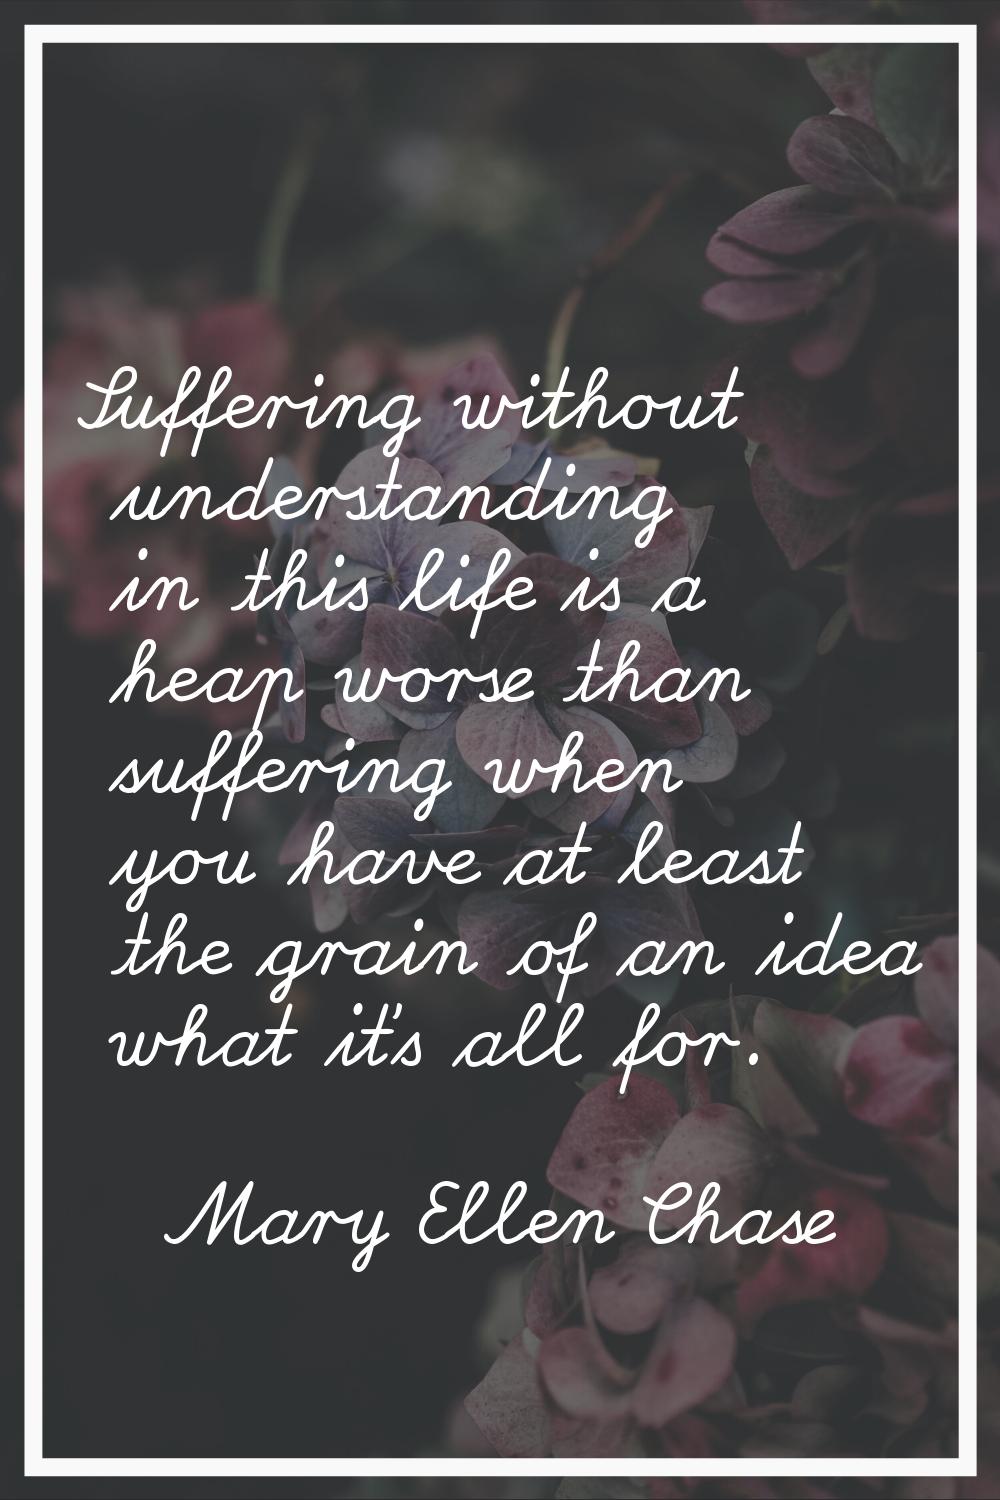 Suffering without understanding in this life is a heap worse than suffering when you have at least 